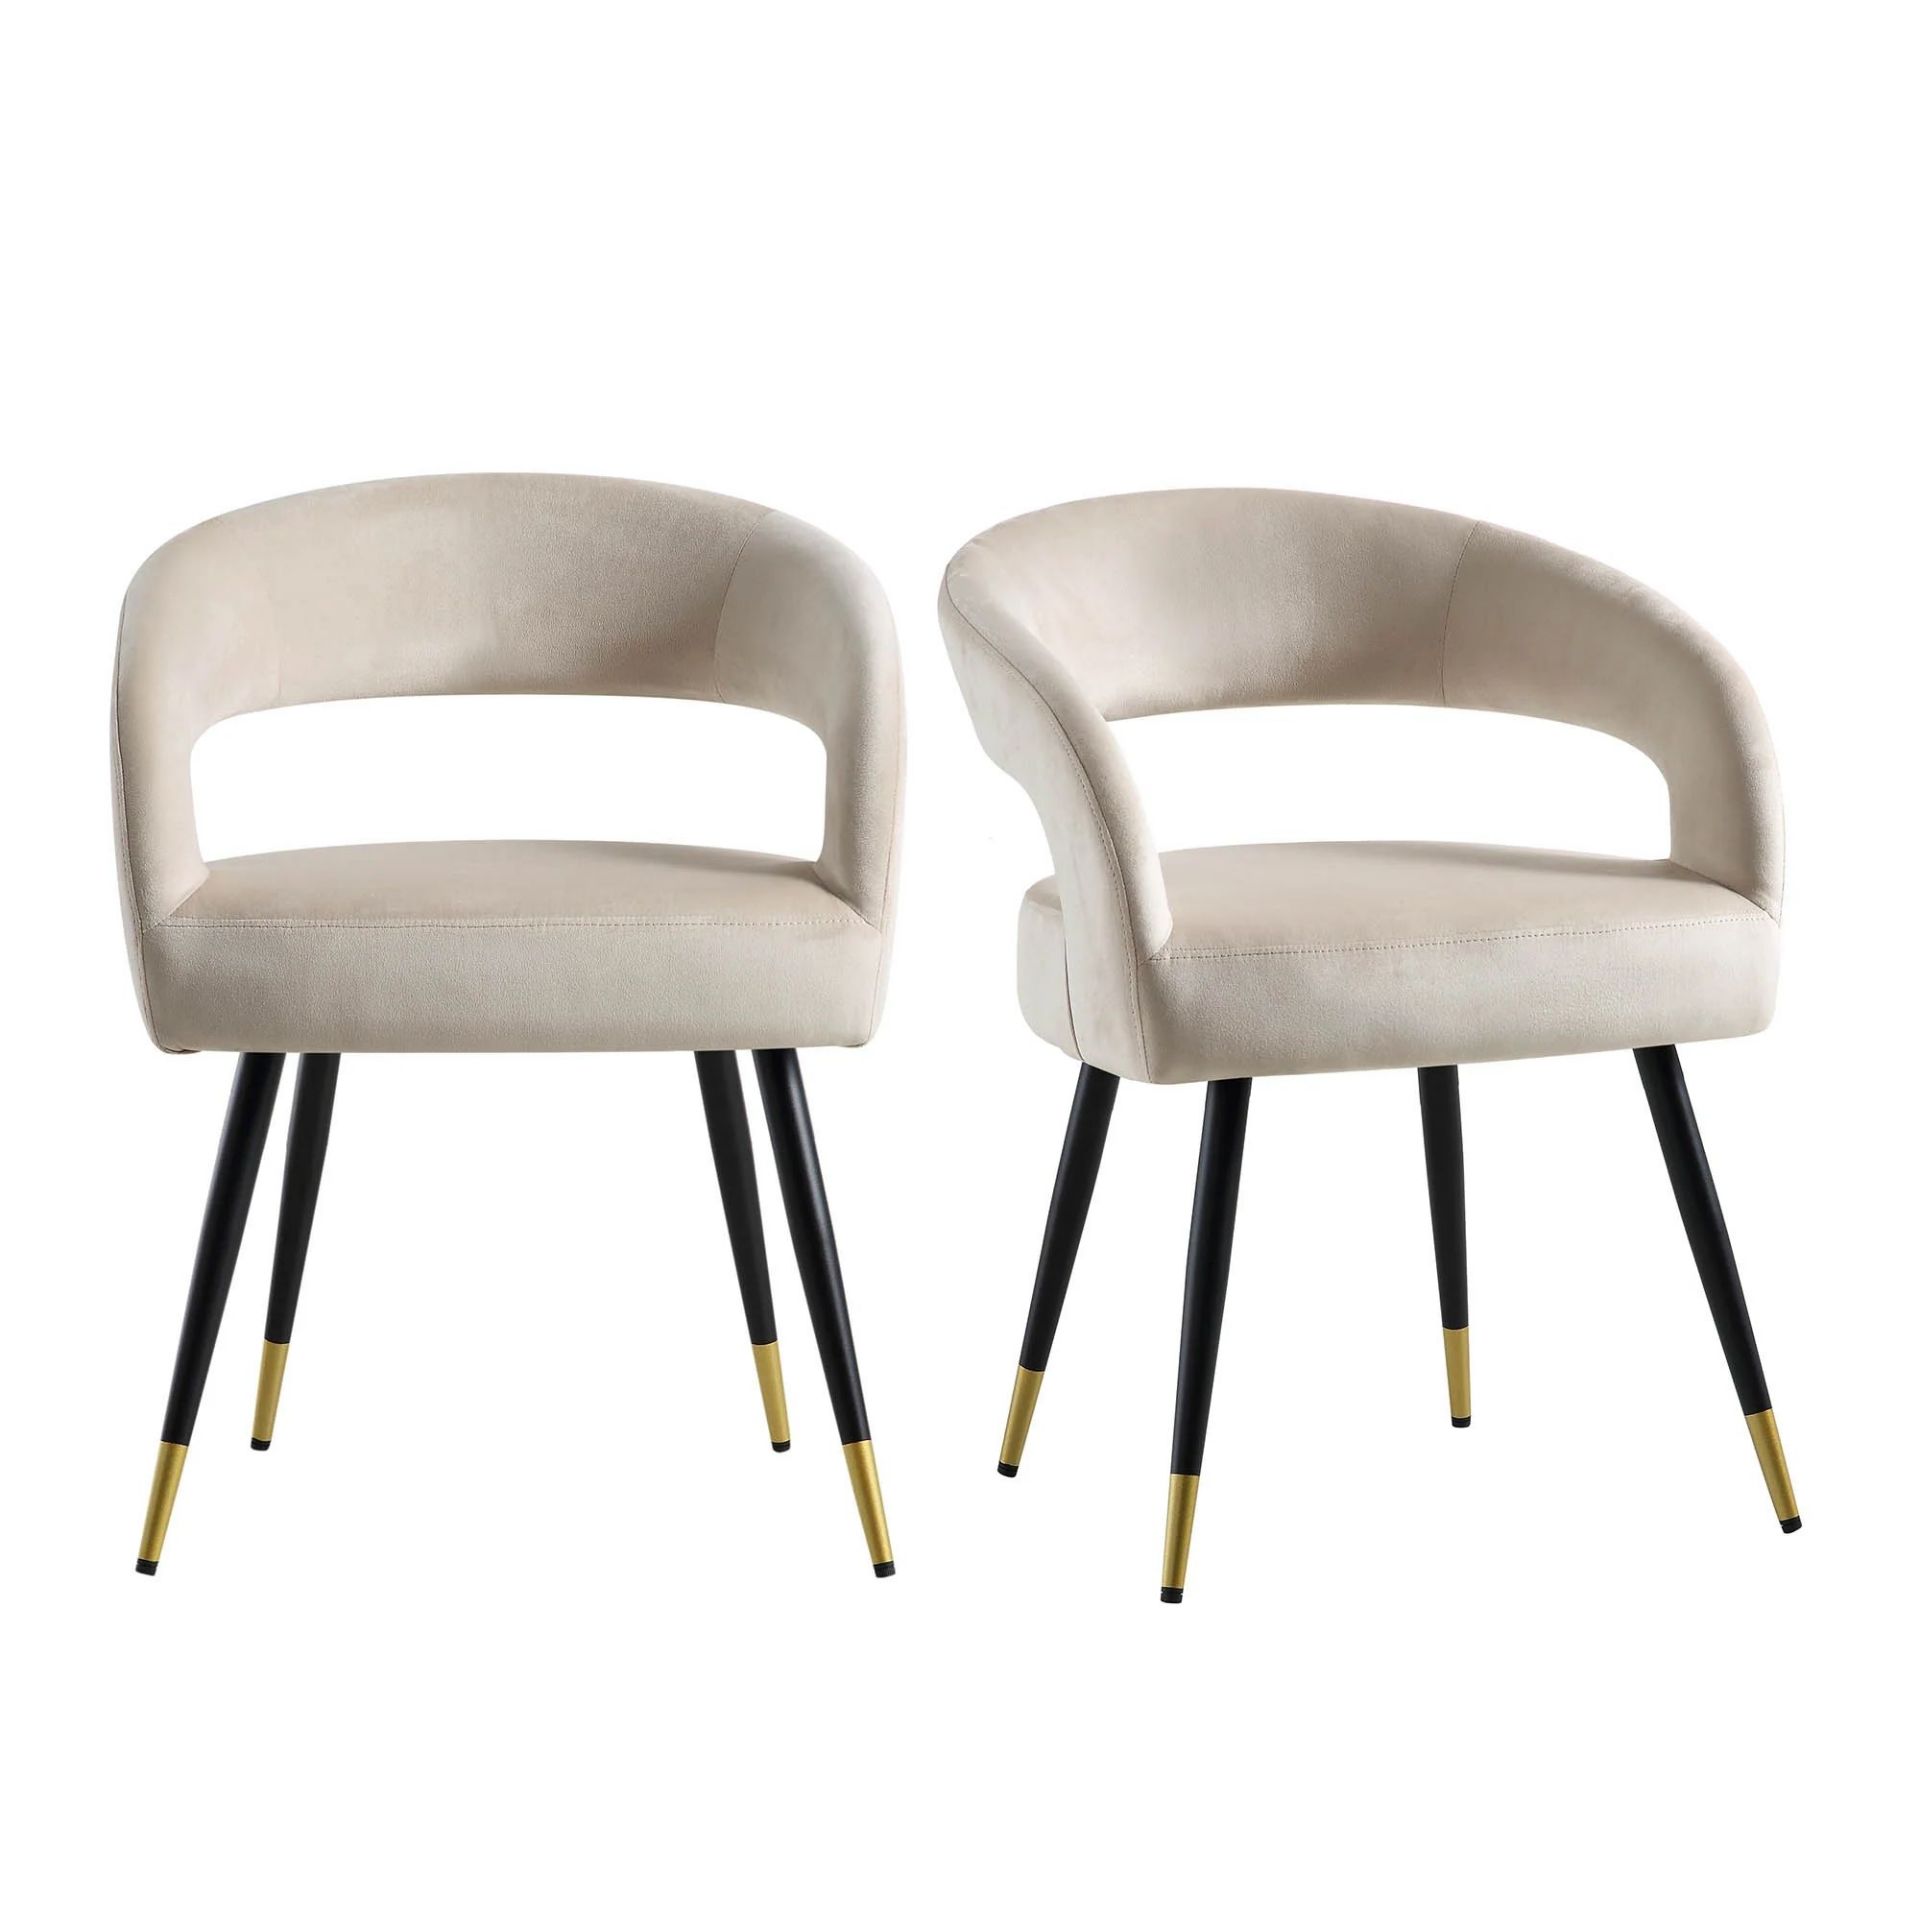 Laurel Wave Champagne Velvet Set of 2 Dining Chairs. - R14BW. RRP £259.99. The curved cut out - Image 4 of 4